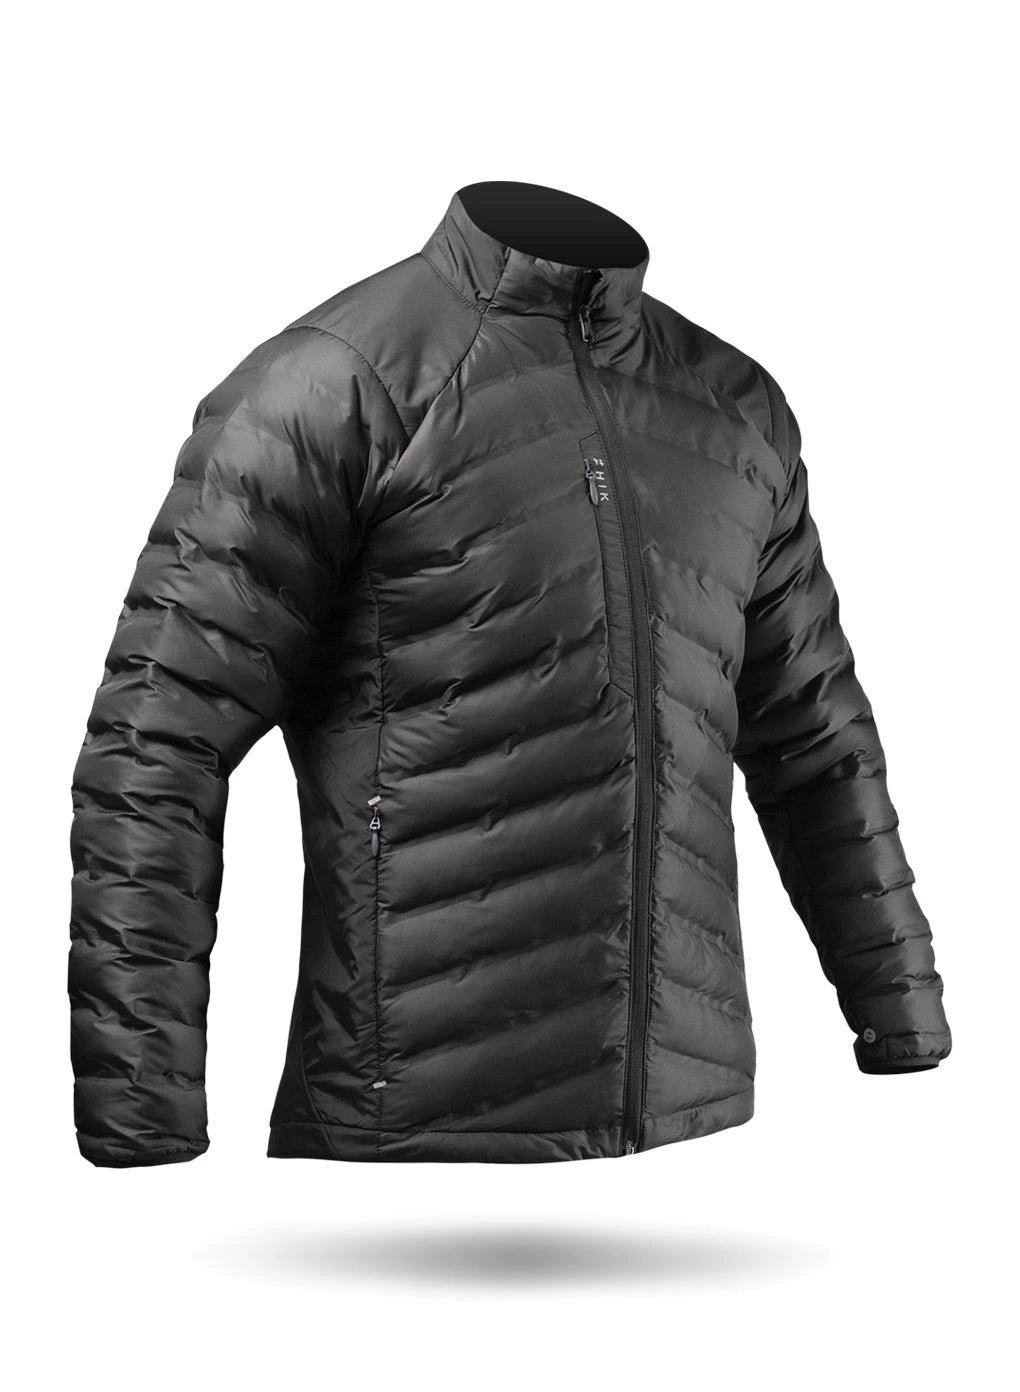 Zhik Men's Cell Insulated Jacket